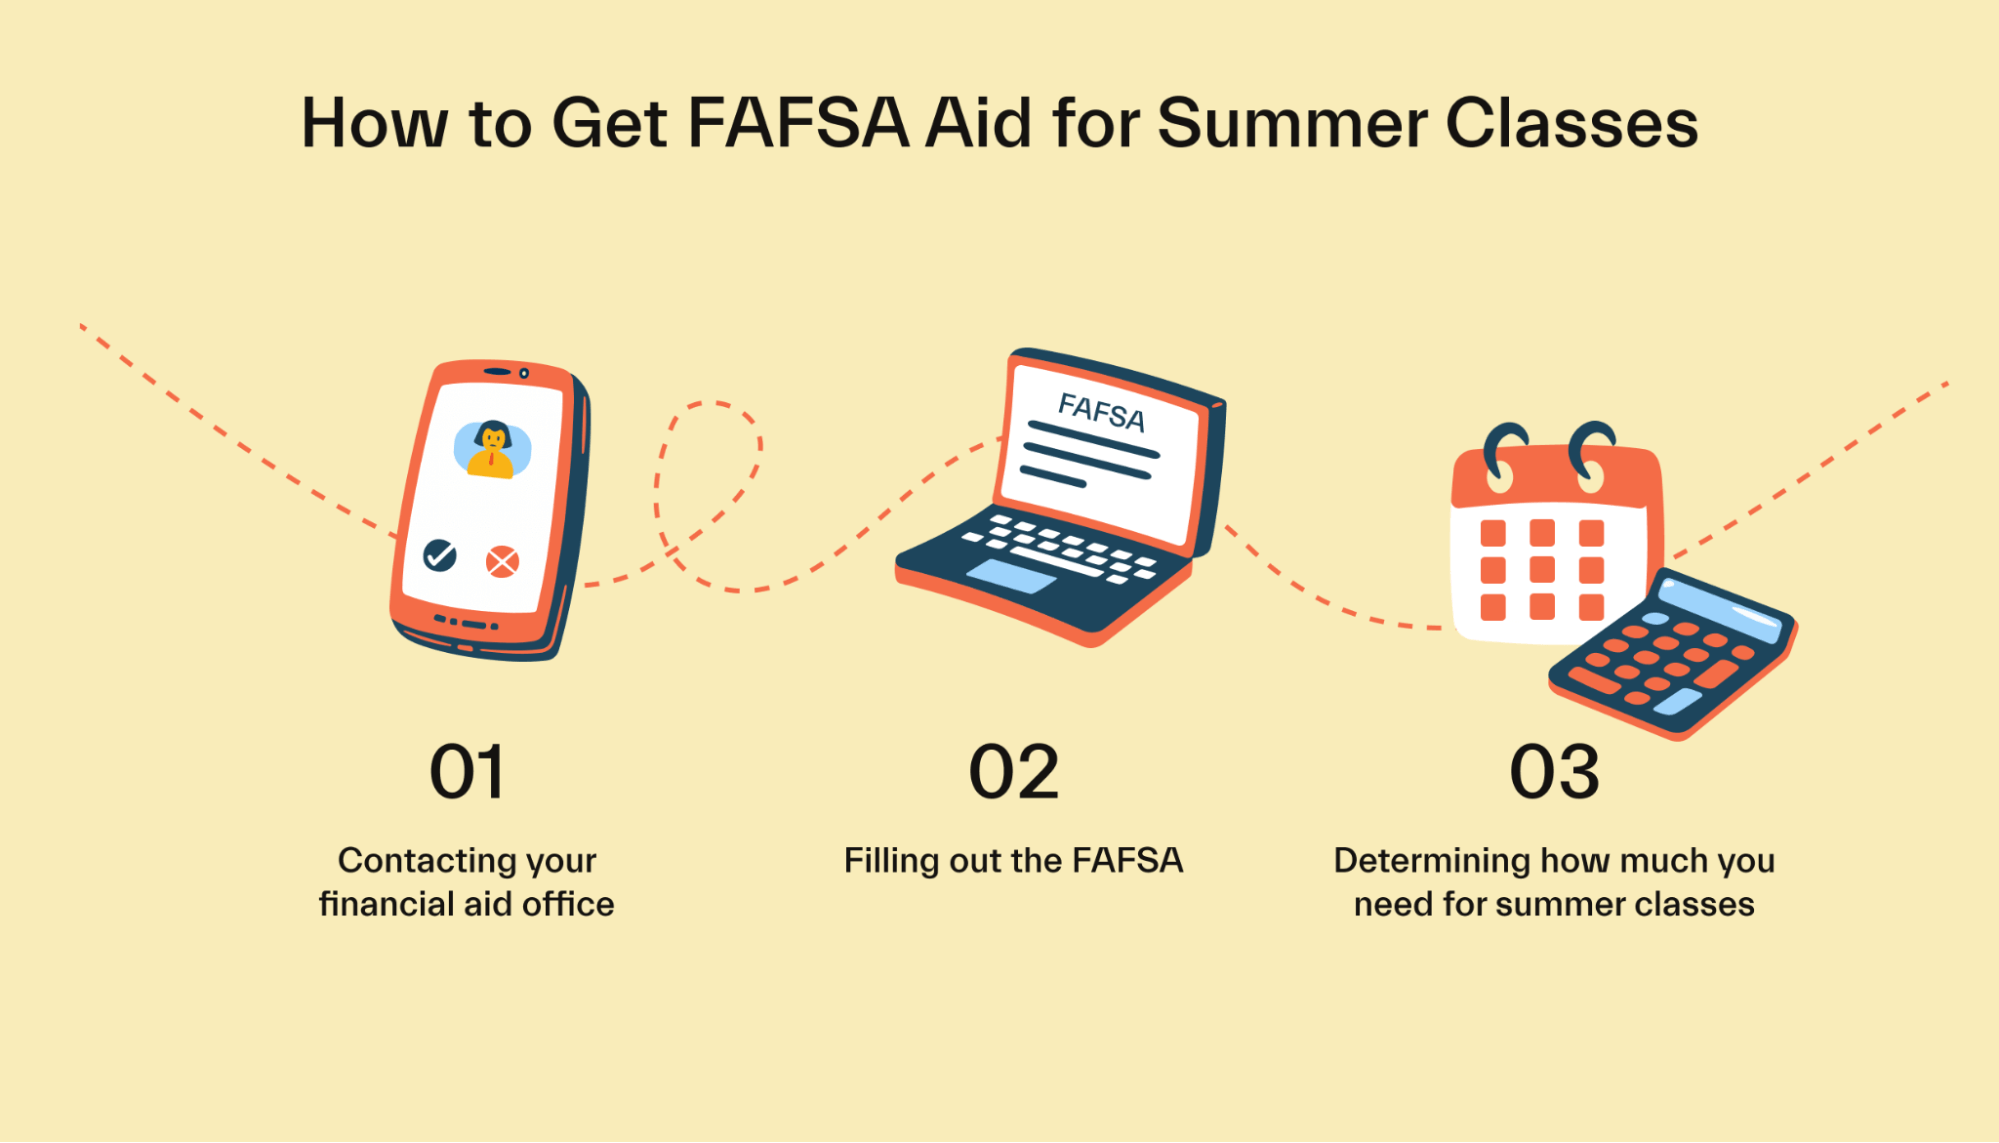 How to Get FAFSA Aid for Summer Classes